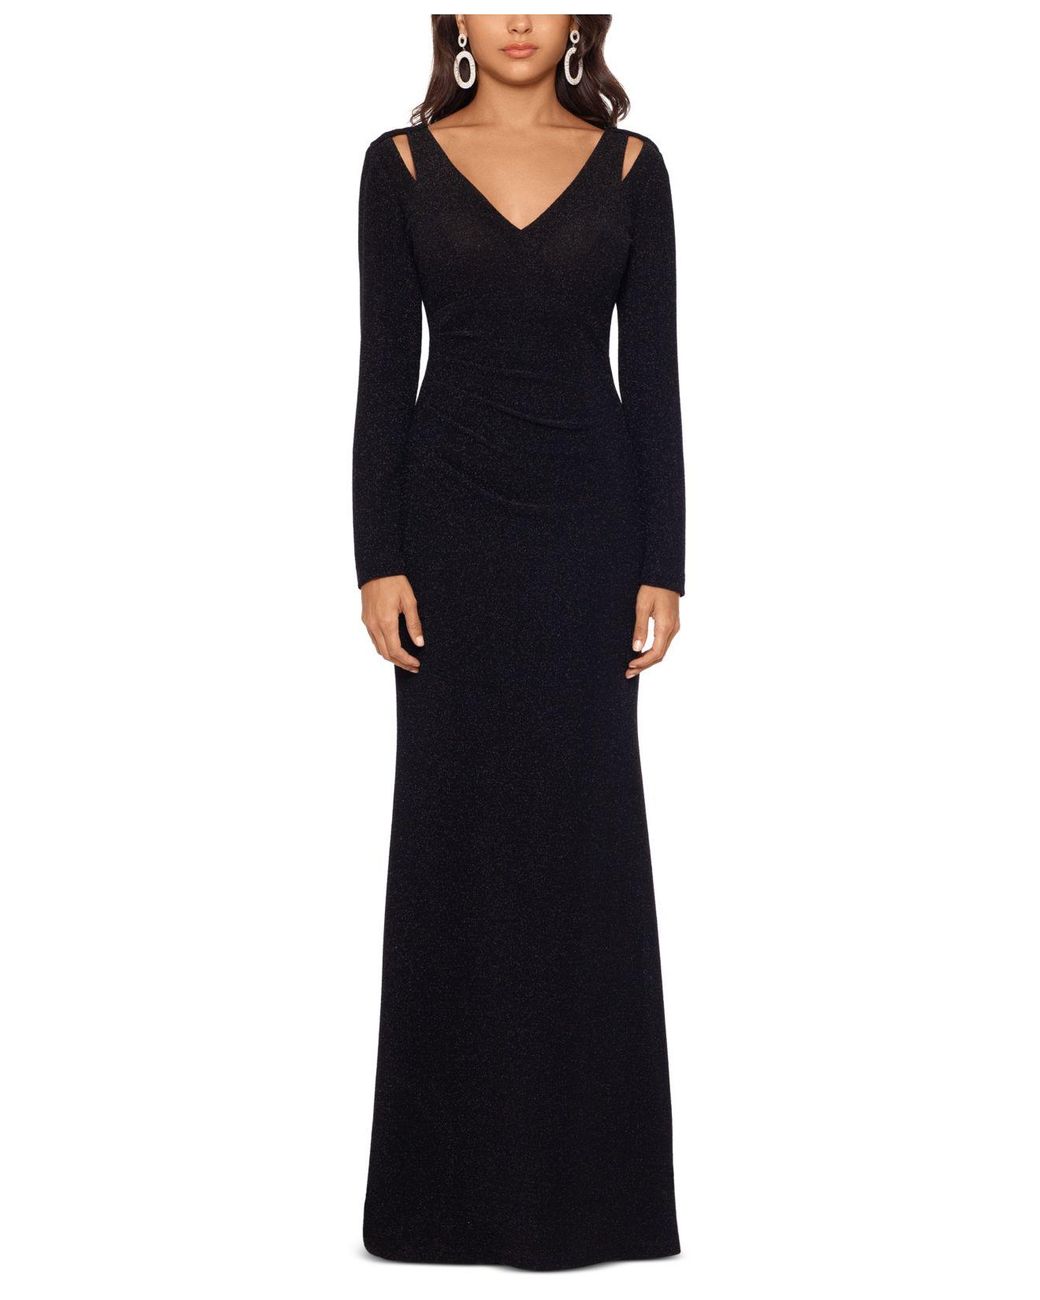 Xscape Synthetic Glitter Cutout-shoulder Gown in Black - Lyst